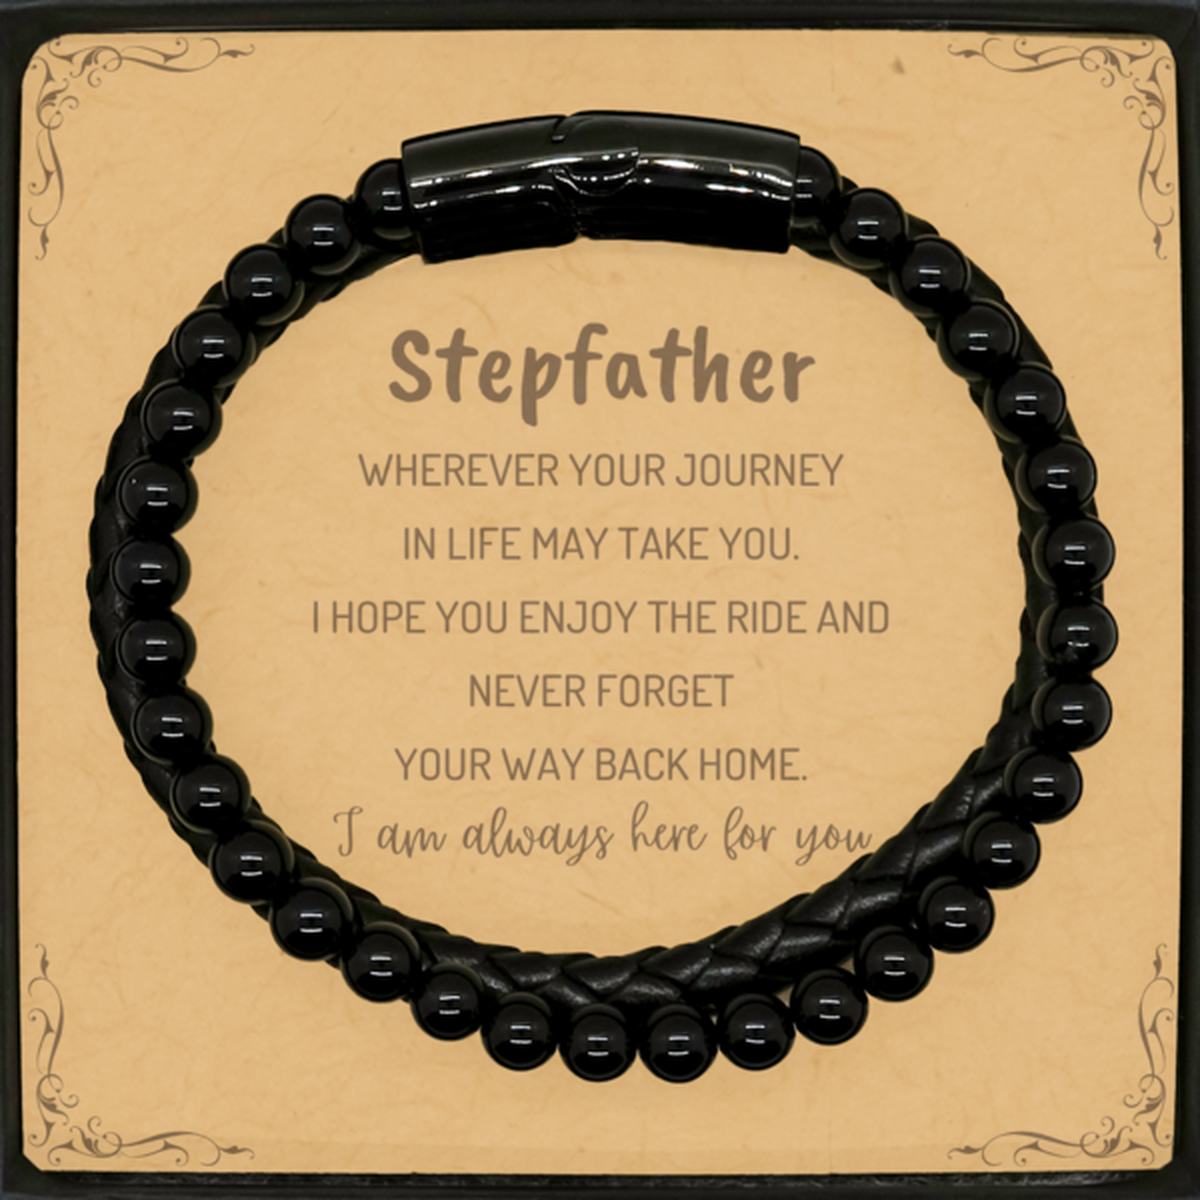 Stepfather wherever your journey in life may take you, I am always here for you Stepfather Stone Leather Bracelets, Awesome Christmas Gifts For Stepfather Message Card, Stepfather Birthday Gifts for Men Women Family Loved One